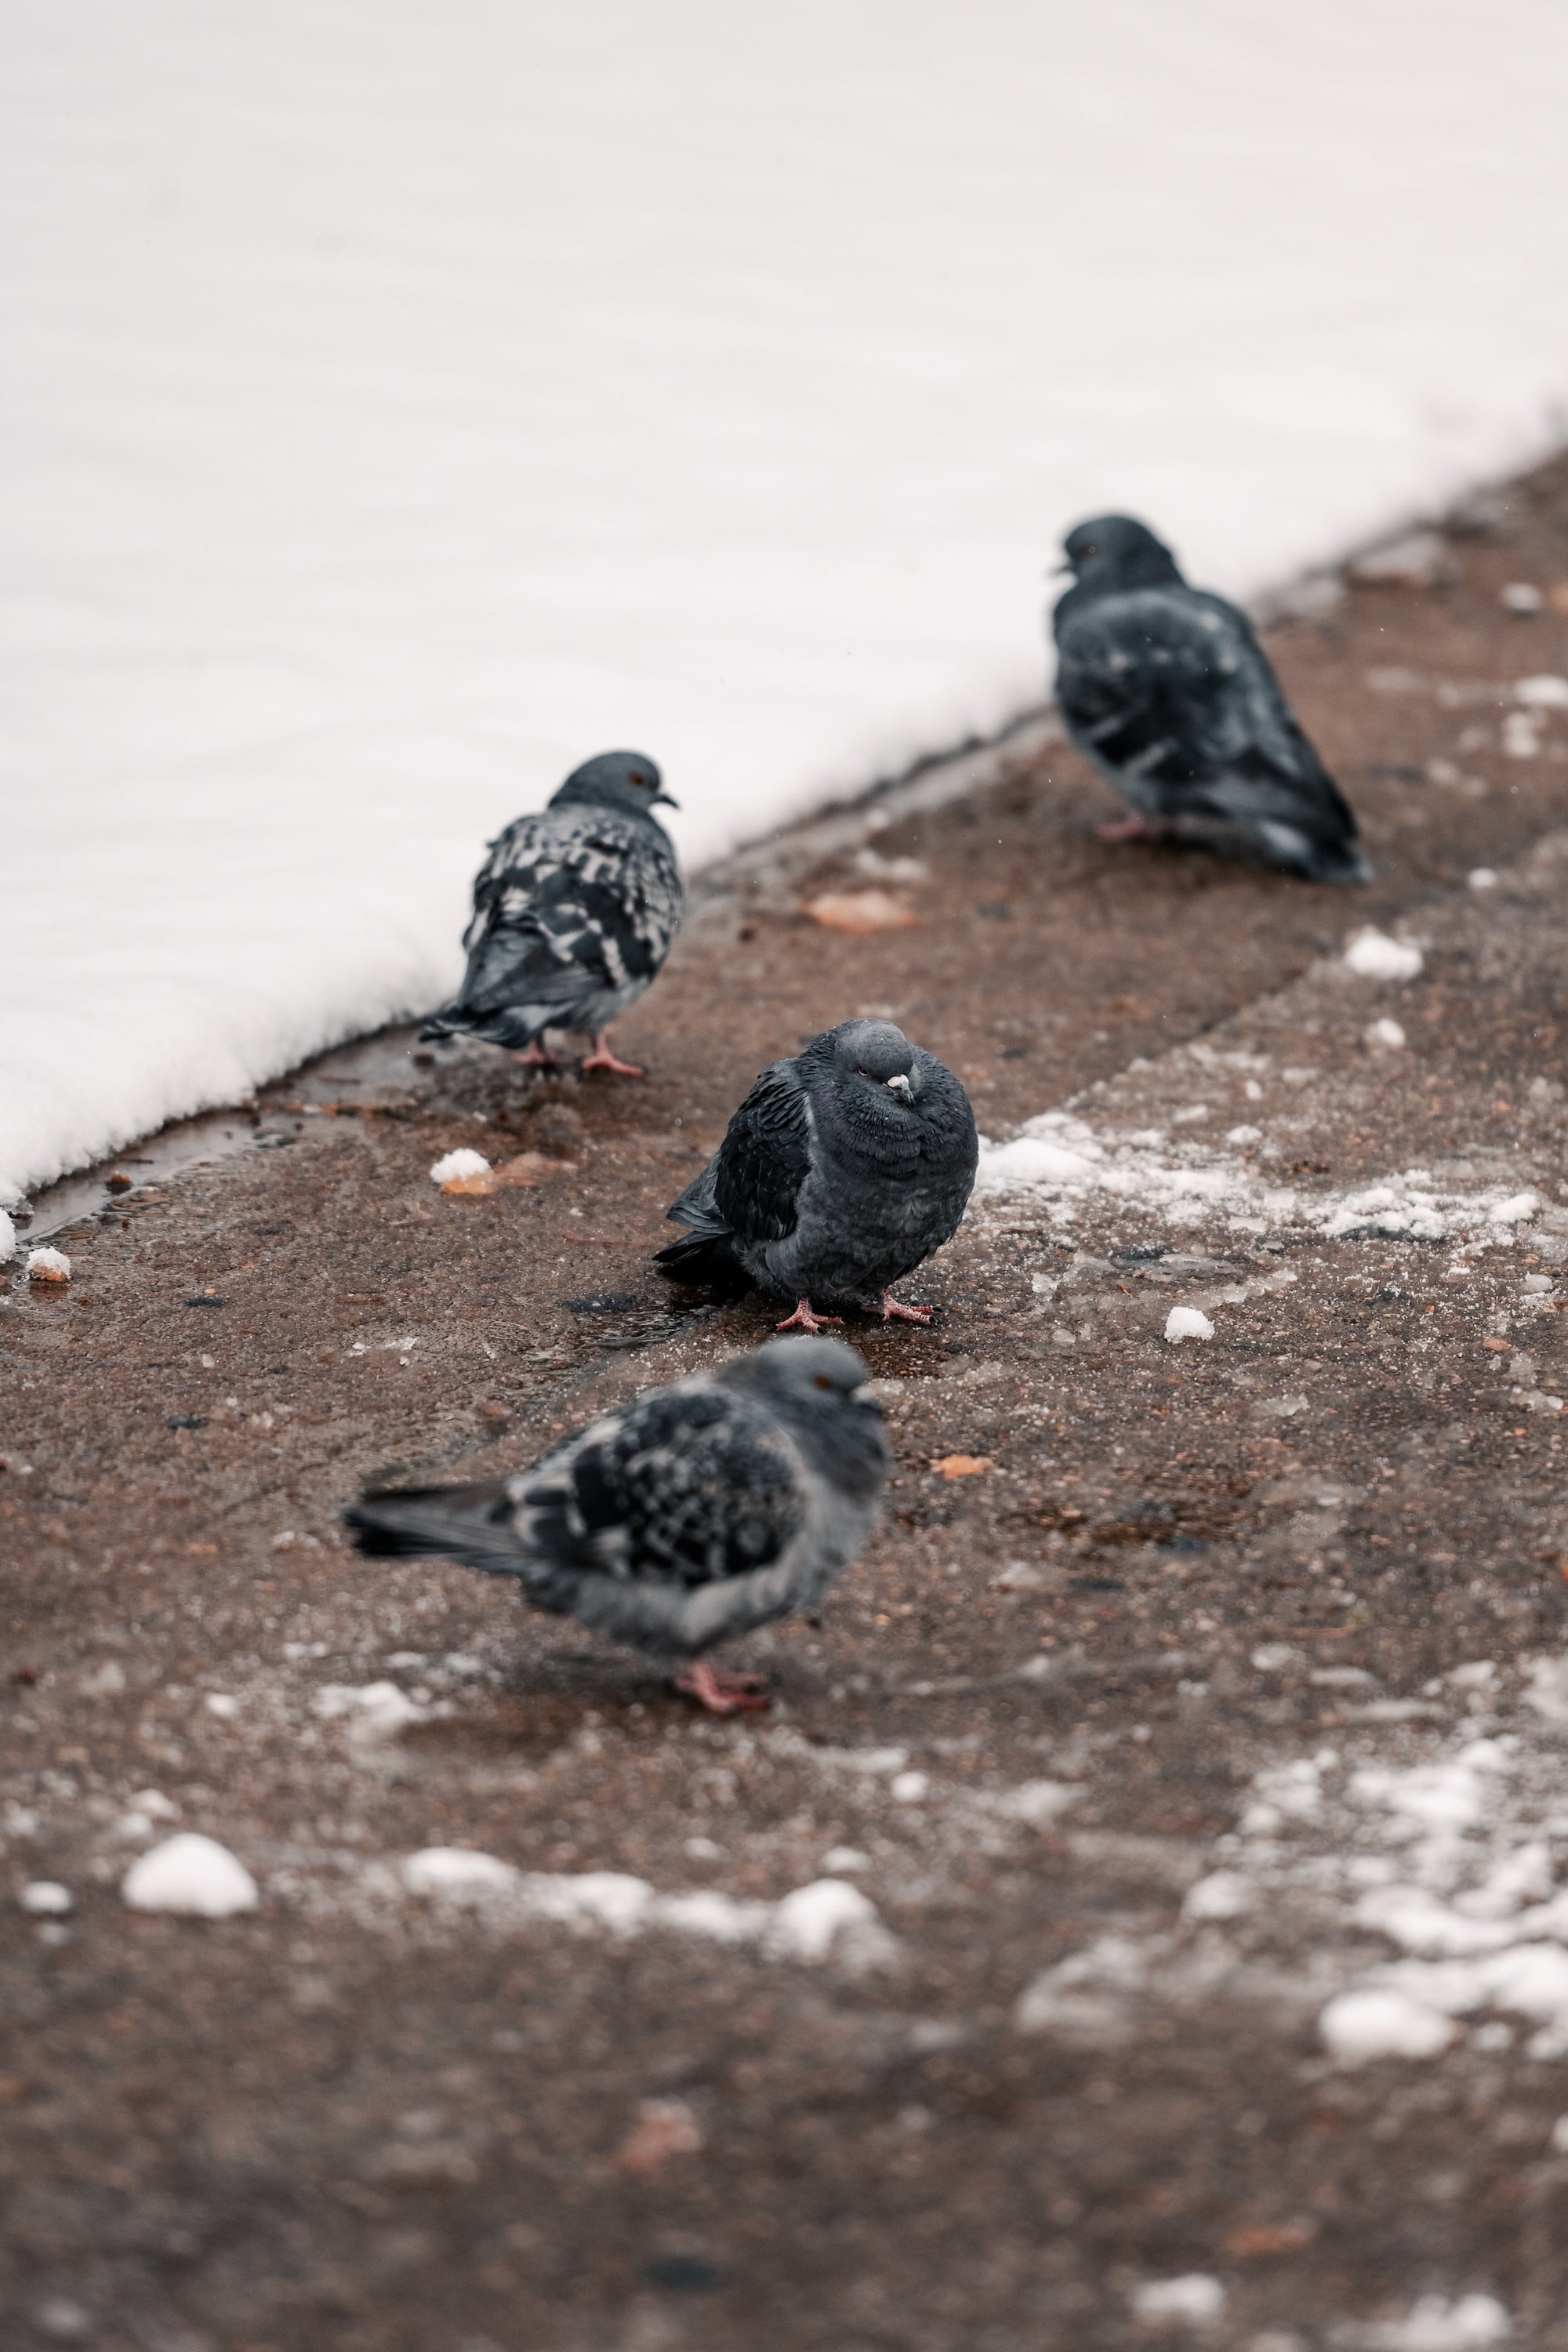 Did you know that bird droppings can cause serious damage? Centex specializes in providing you with permanent bird removal services, sanitization, and cleanup